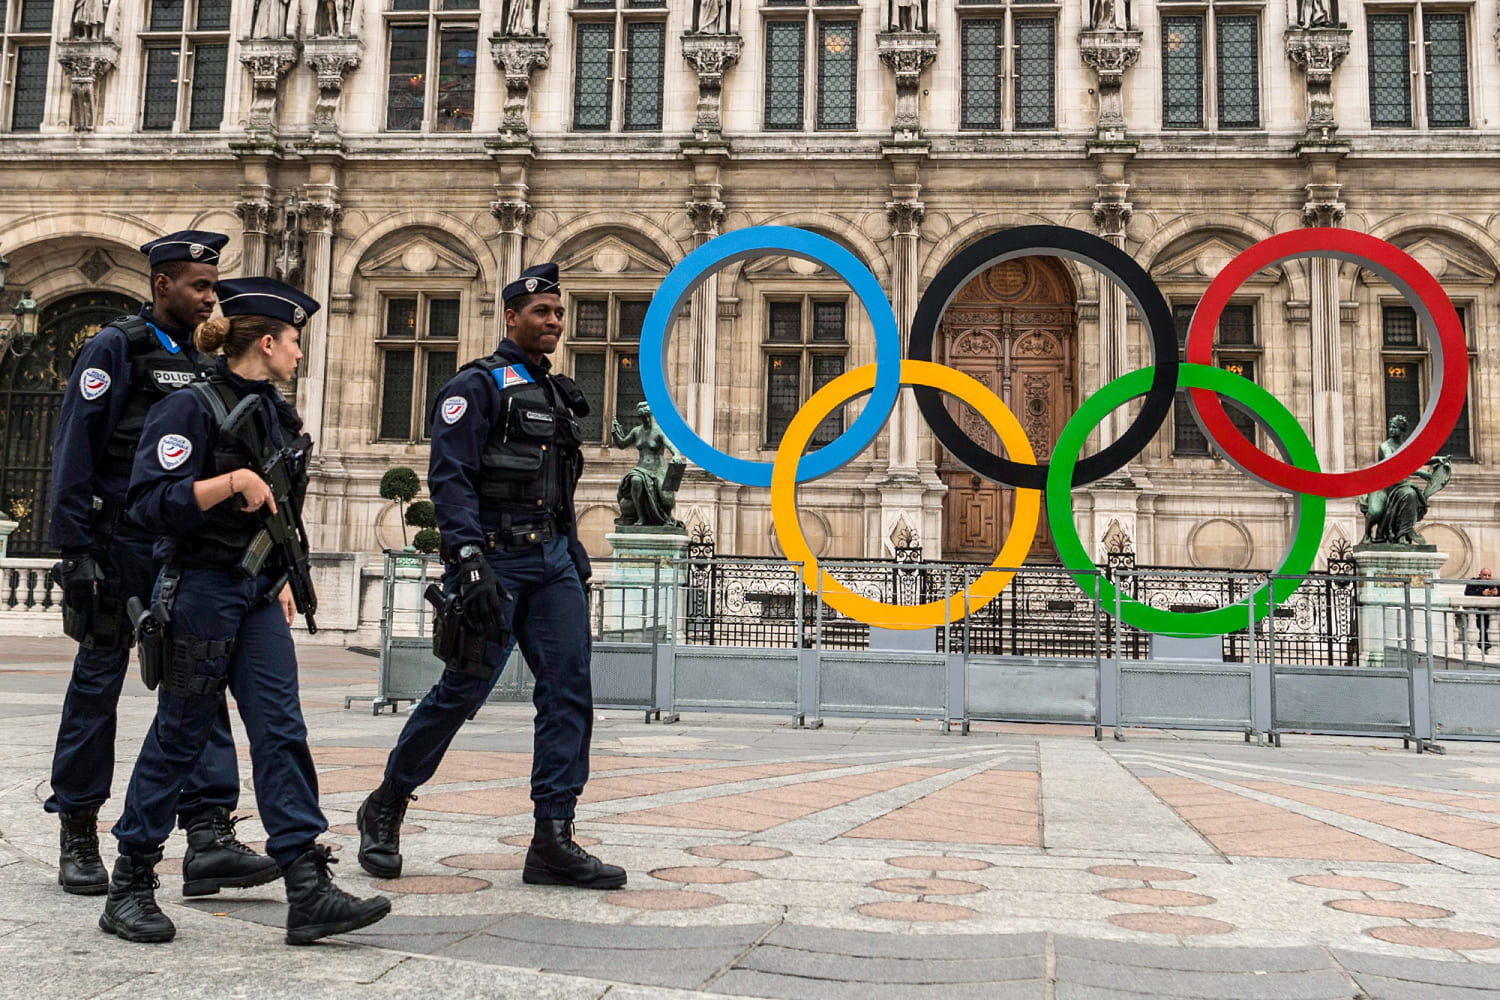 Glistening buildings, crisp bed sheets and security worries: Inside Paris’ Olympic prep